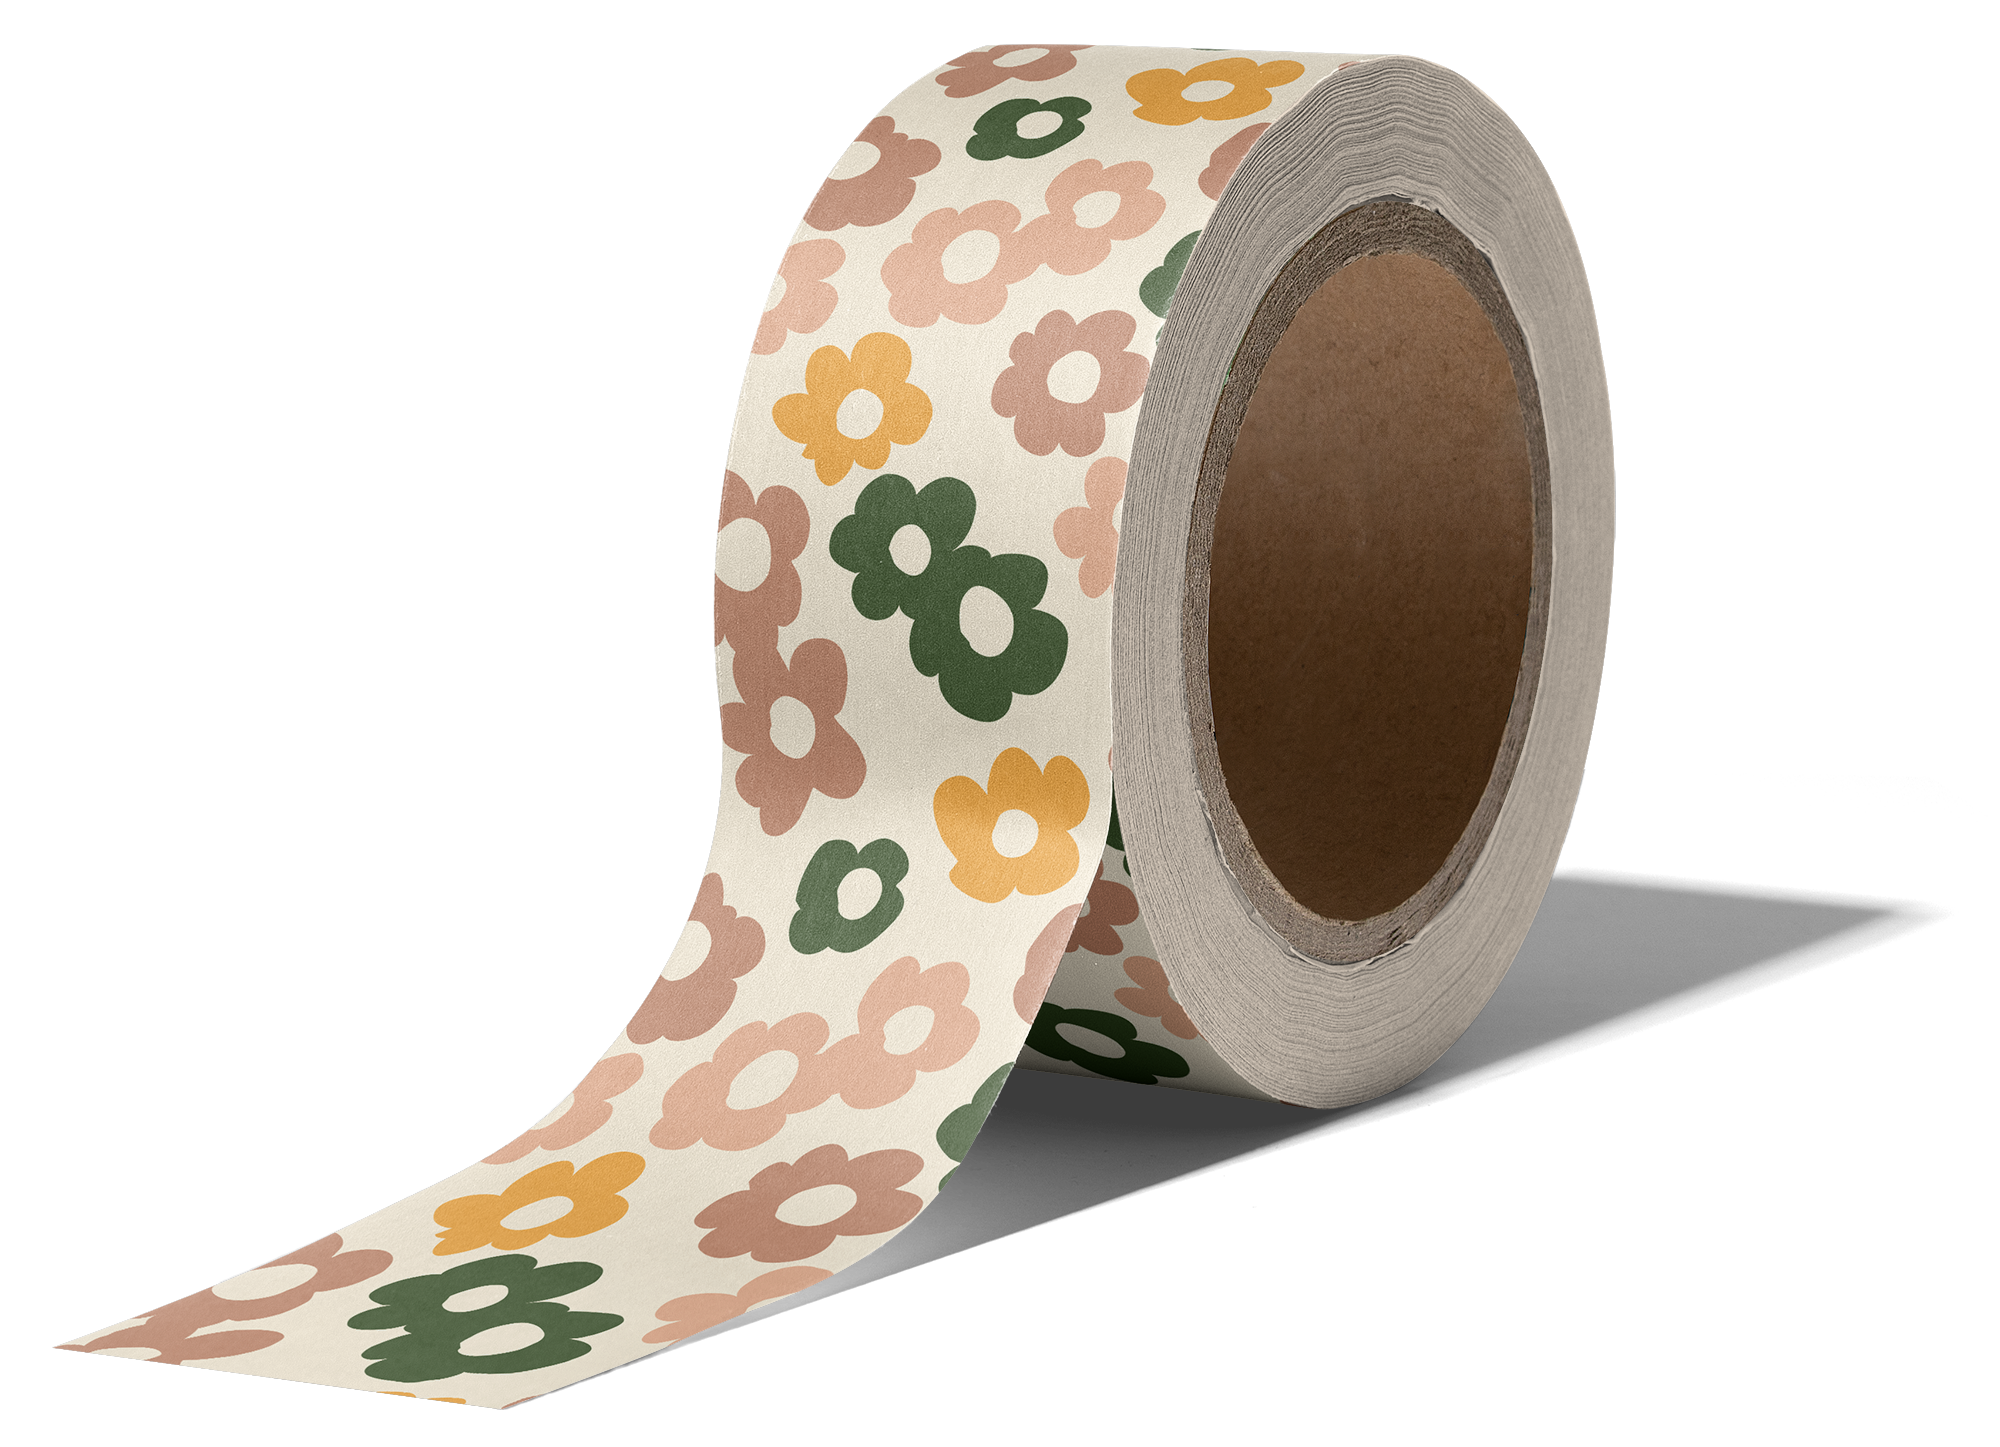 A roll of floral pattern Water-Activated Tape with some unrolled and extending to the right. 
Product Name: Packing Tape - Daisy Multi
Brand Name: impack.co